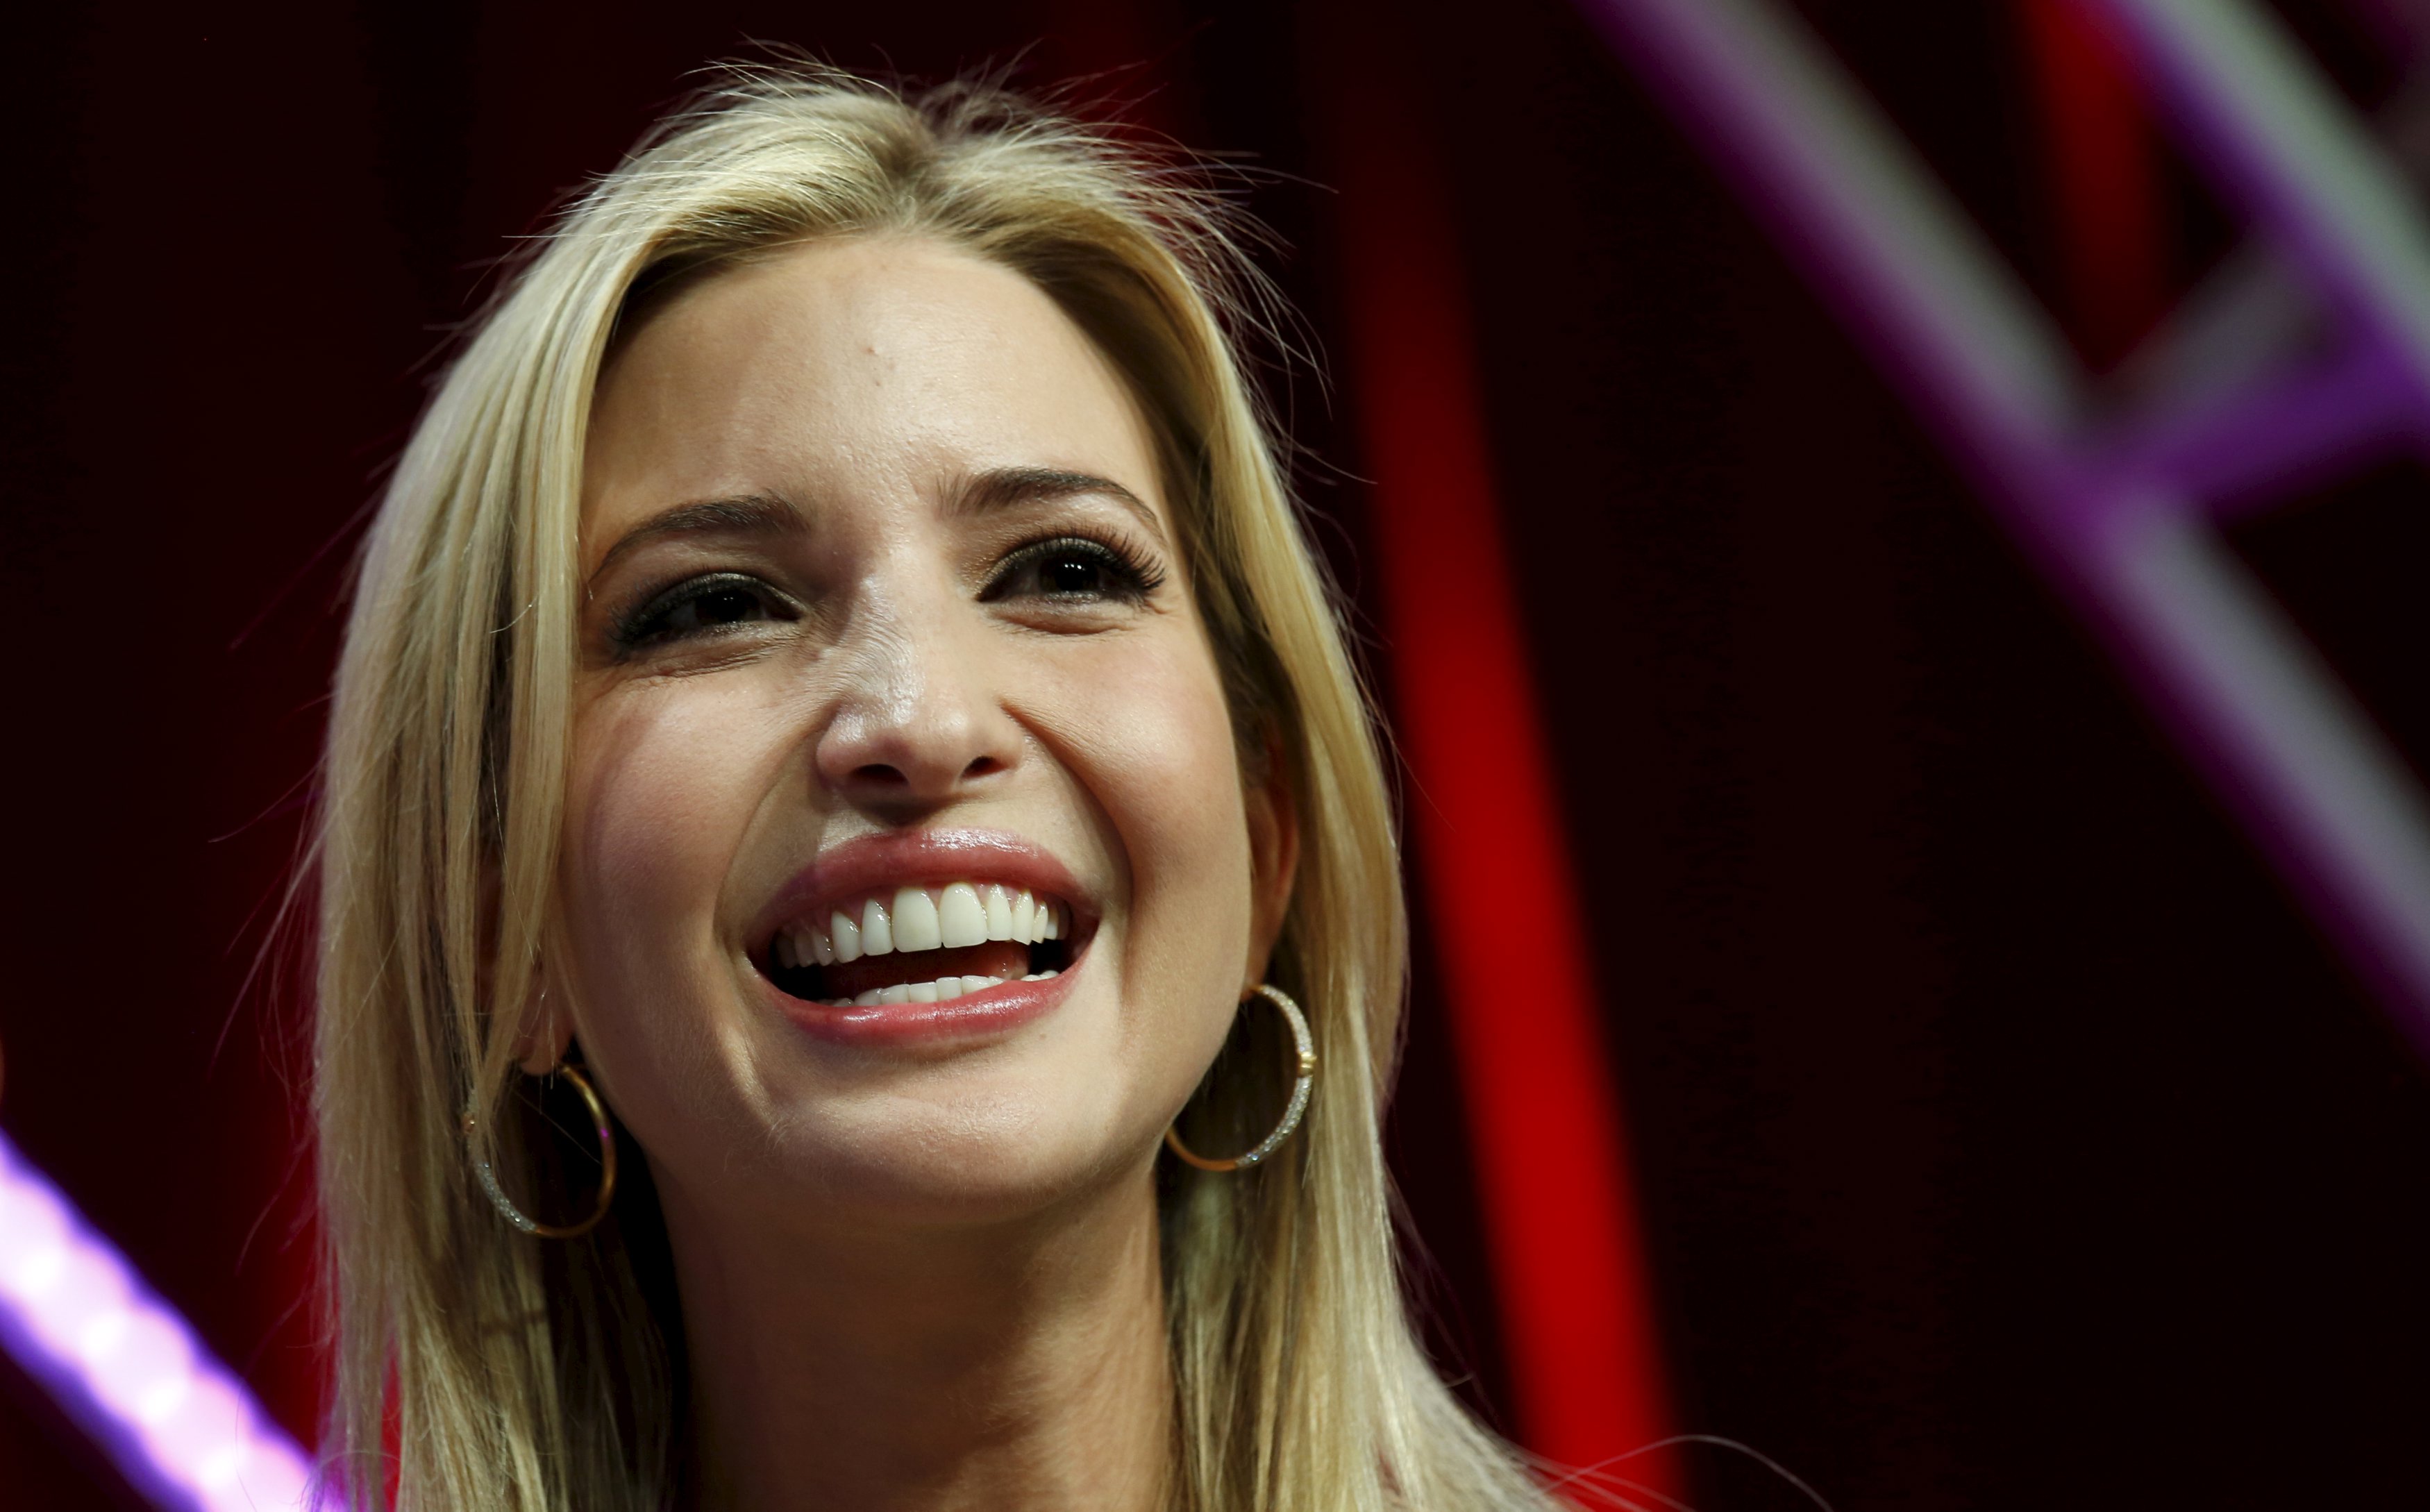 Ivanka Trump, daughter of Republican presidential hopeful Donald Trump and Founder and CEO of Ivanka Trump Collection, smiles while being interviewed at Fortune's Most Powerful Women's Summit in Washington October 14, 2015. REUTERS/Kevin Lamarque